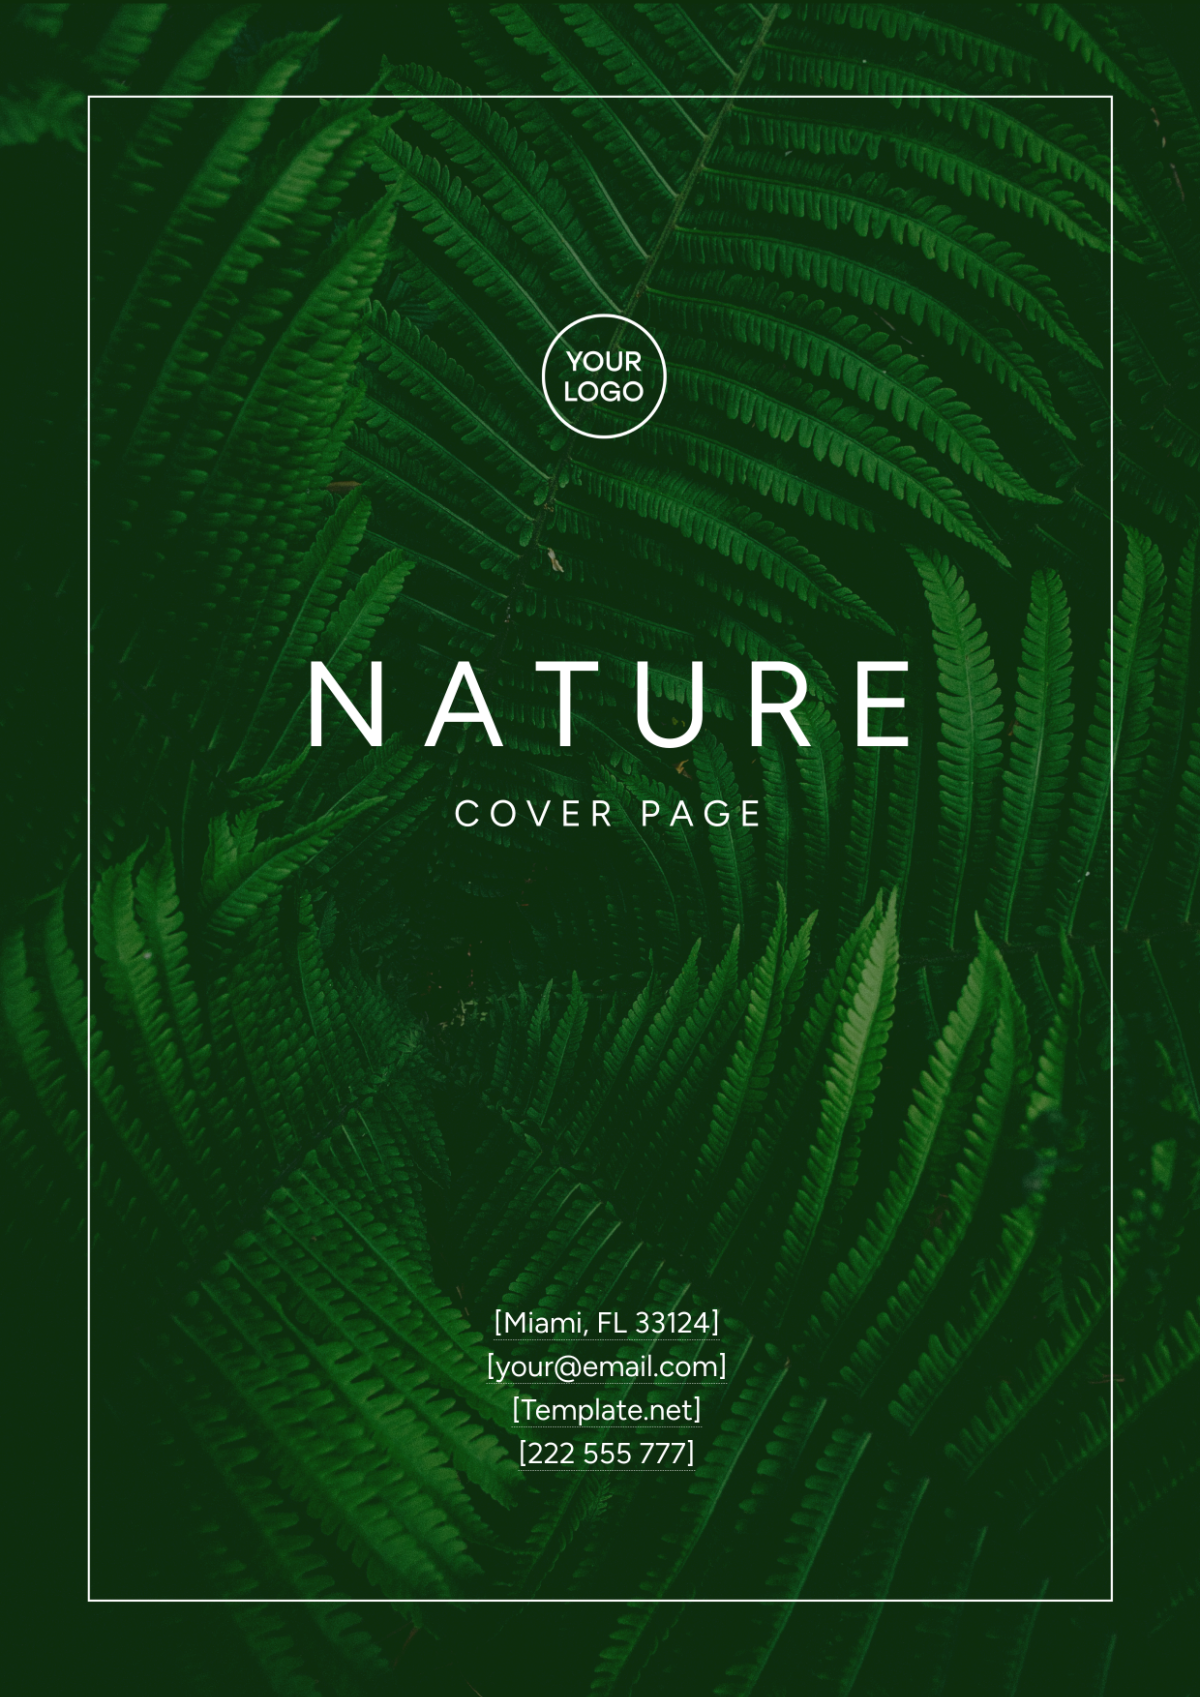 Nature Cover Page Image Template